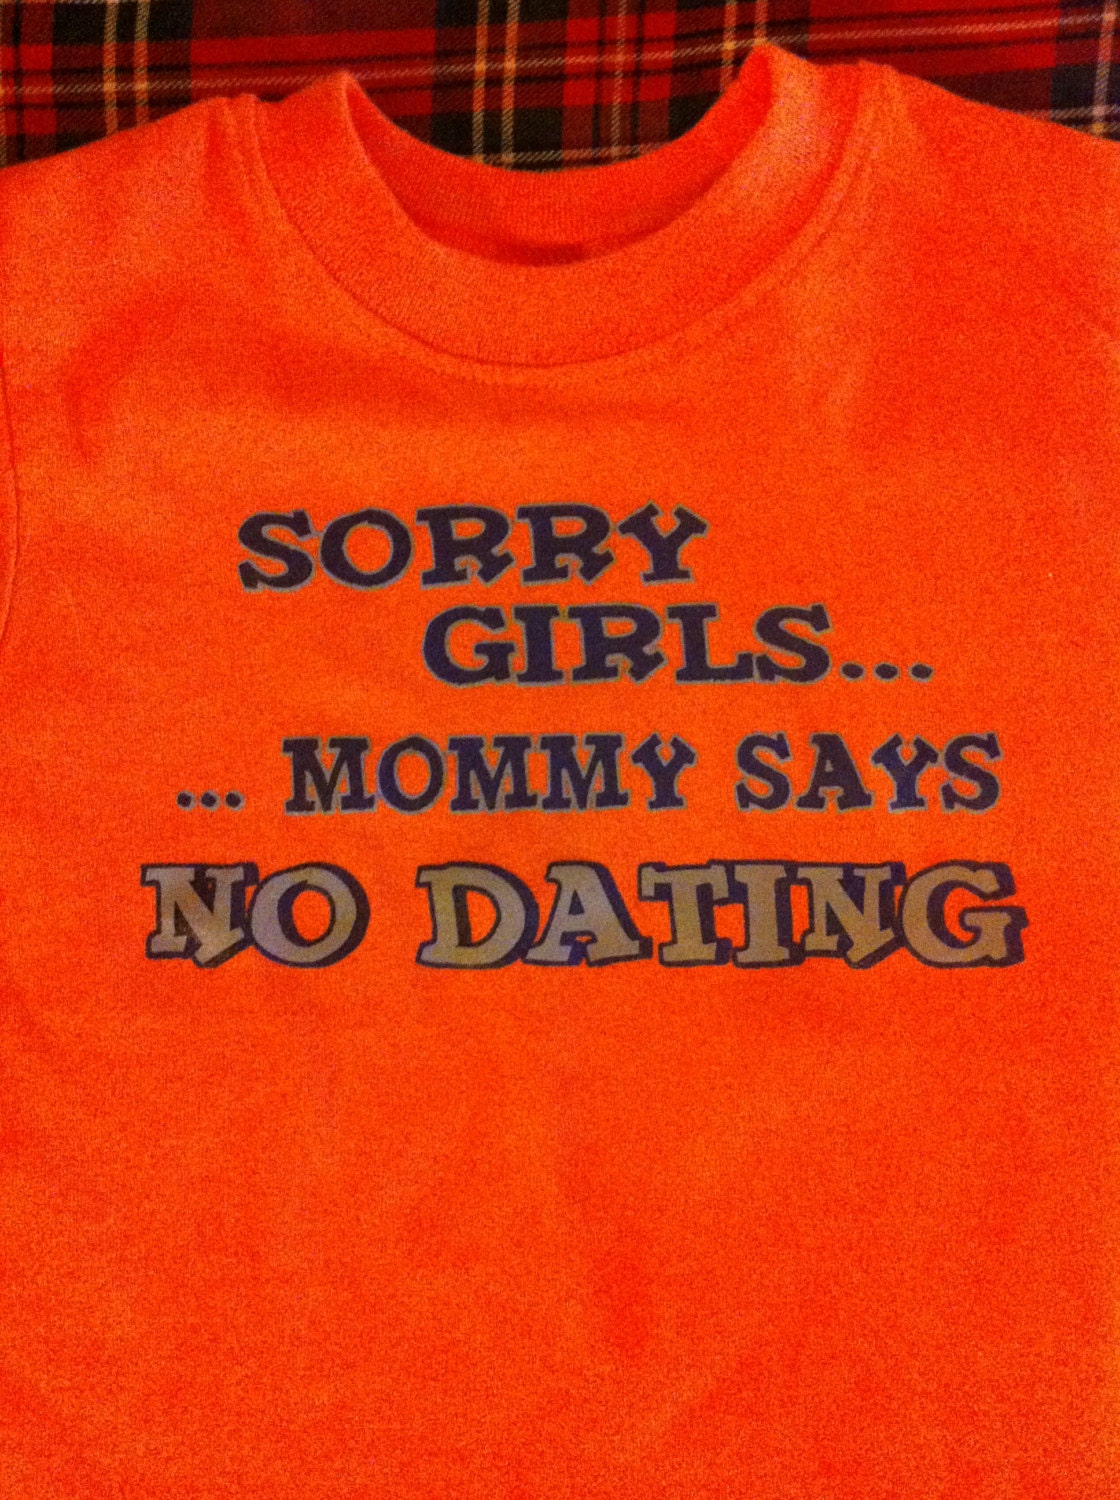 Vintage T Shirt Sorry Girls Mommy Says No Dating By Thunderwing 8185